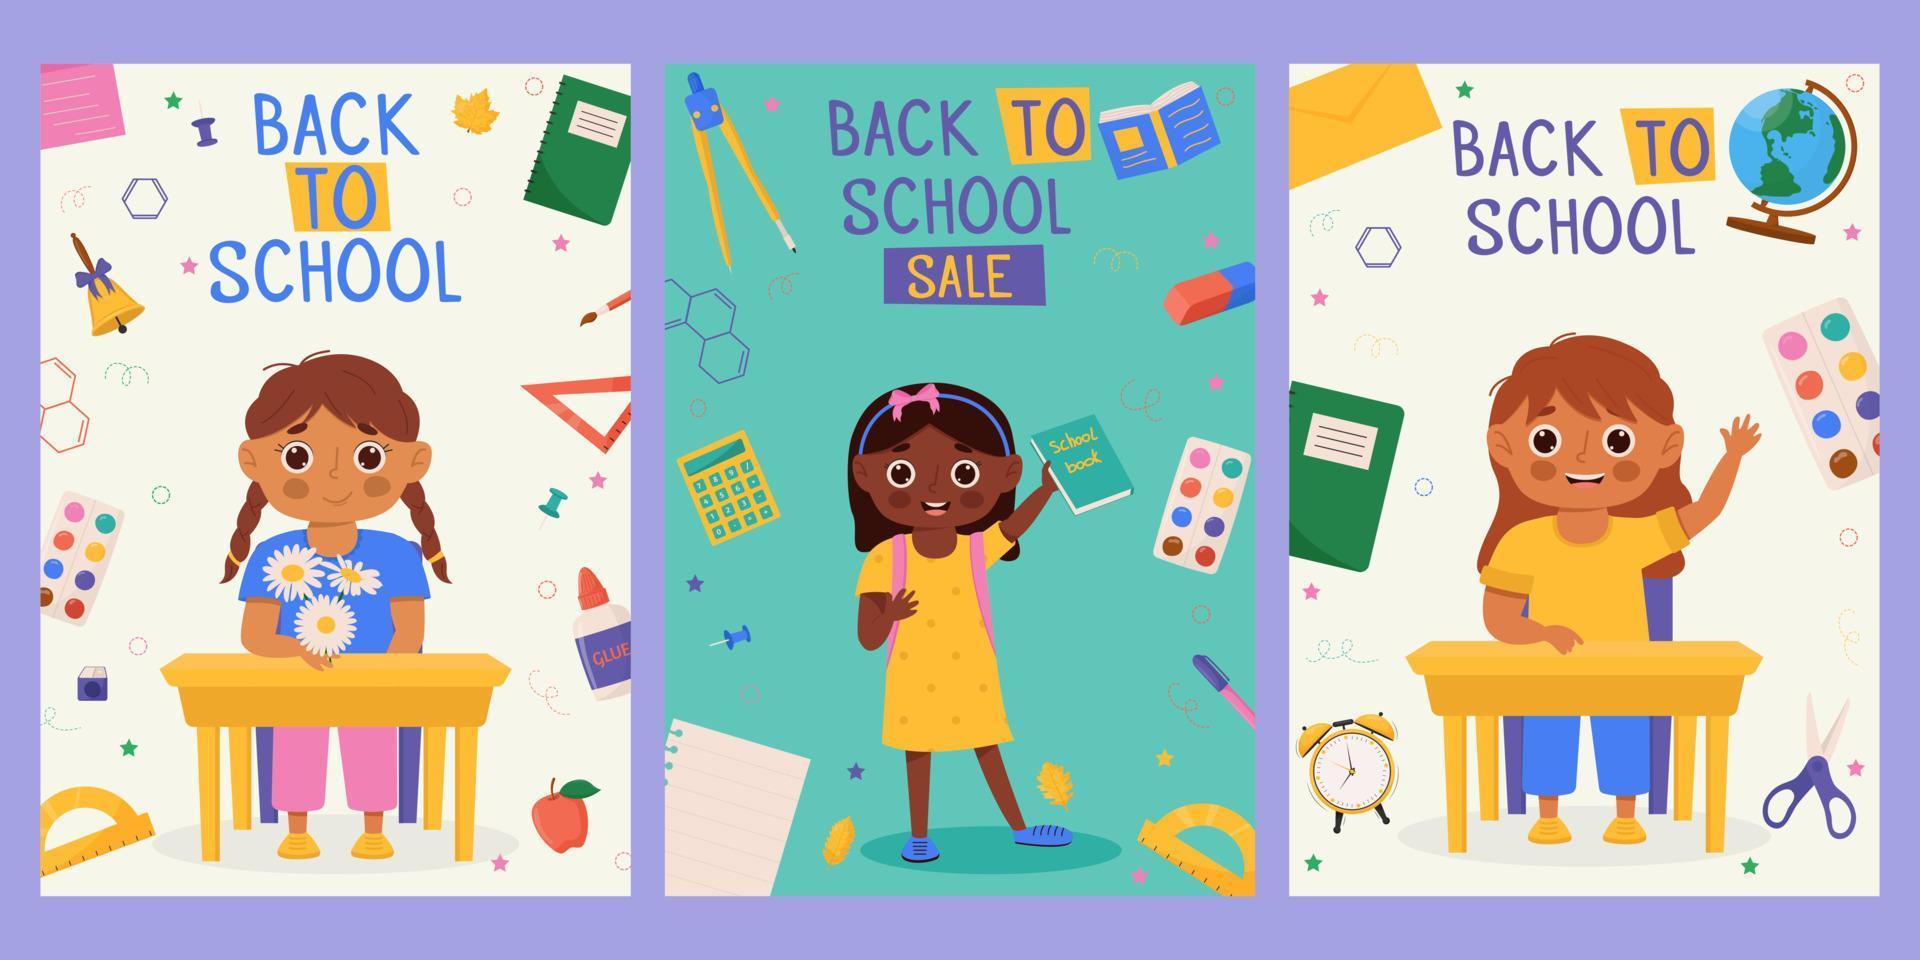 Set of Back to school banner design with colorful funny school character, education items. Colorful back to school templates for invitation, poster, banner, promotion,sale etc. vector